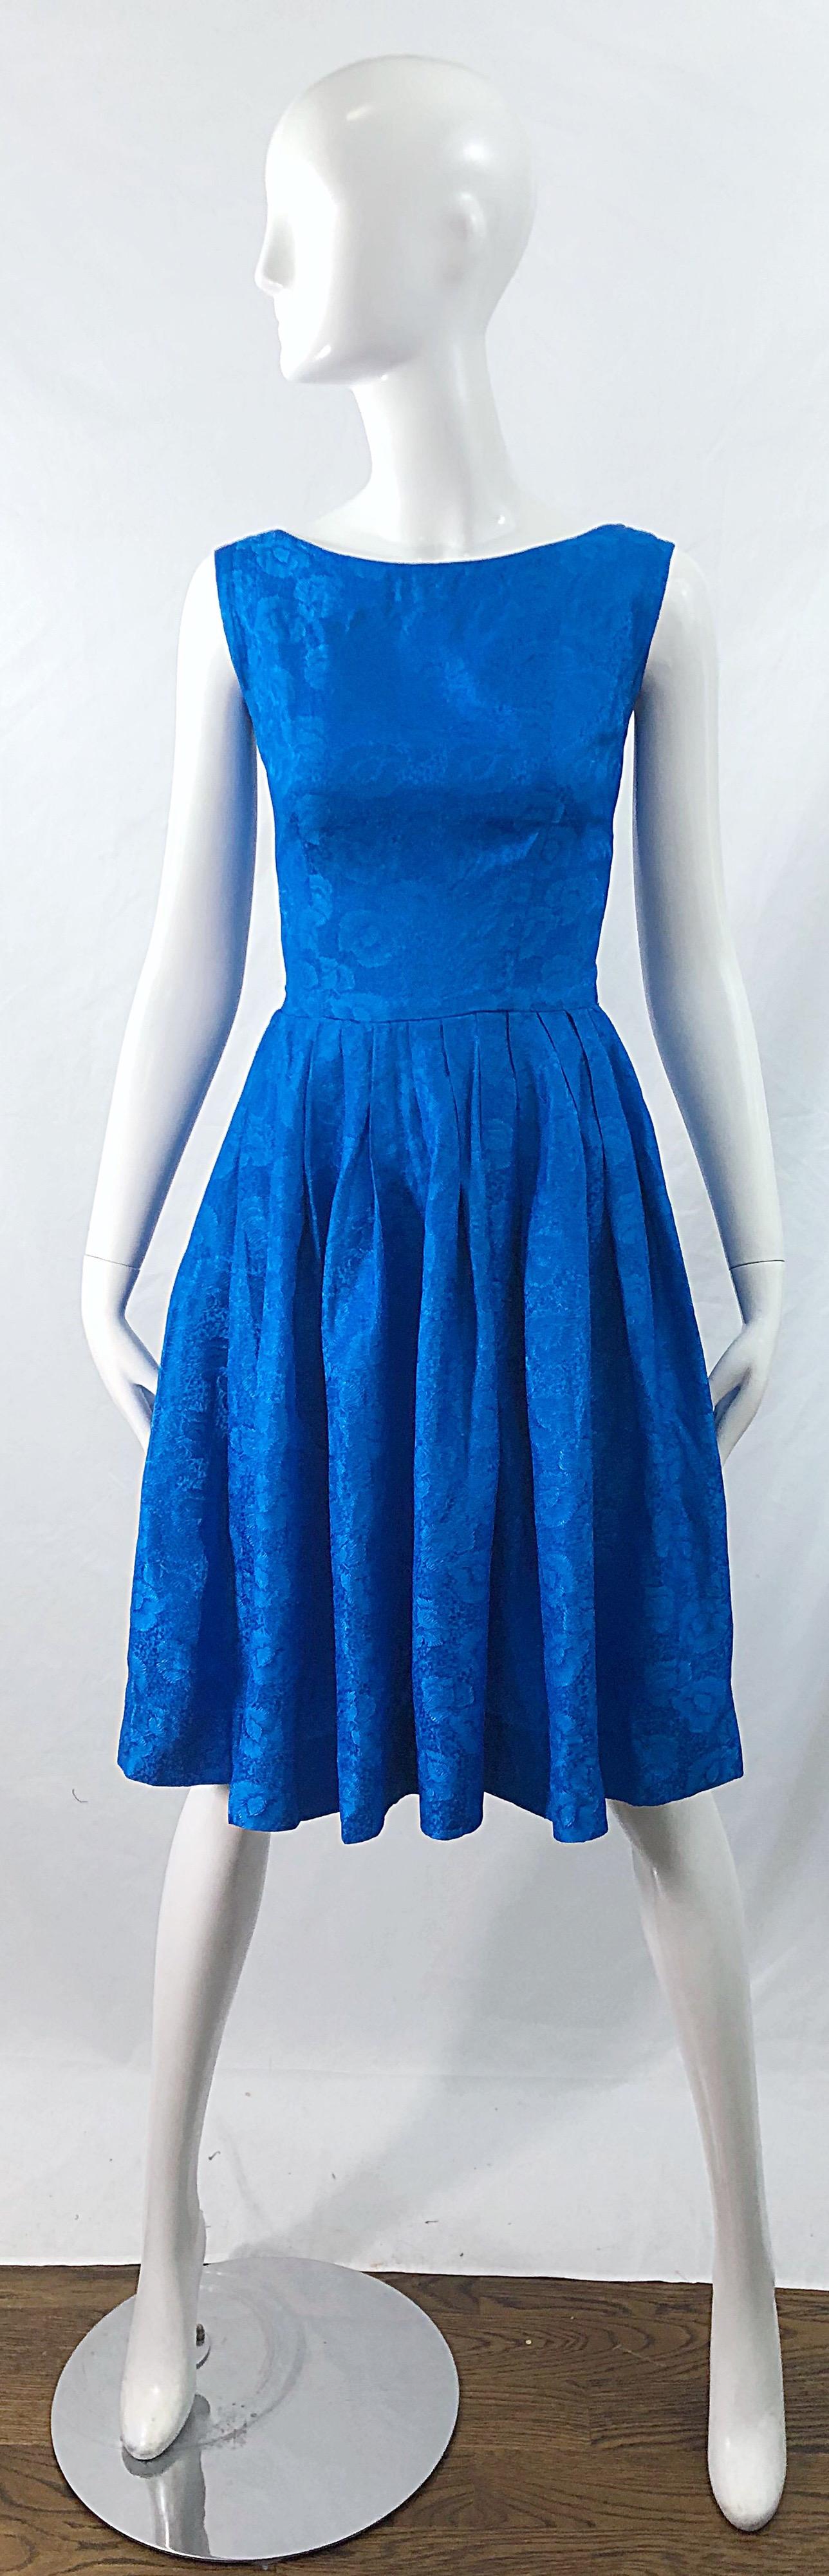 Beautiful 1950s Size 0 cobalt blue silk damask fit n' flare sleeveless rockabilly dress ! Features a tailored bodice with a full skirt. Full metal zipper up the back with hook-and-eye closure. Plenty of room in the skirt to wear a crinoline